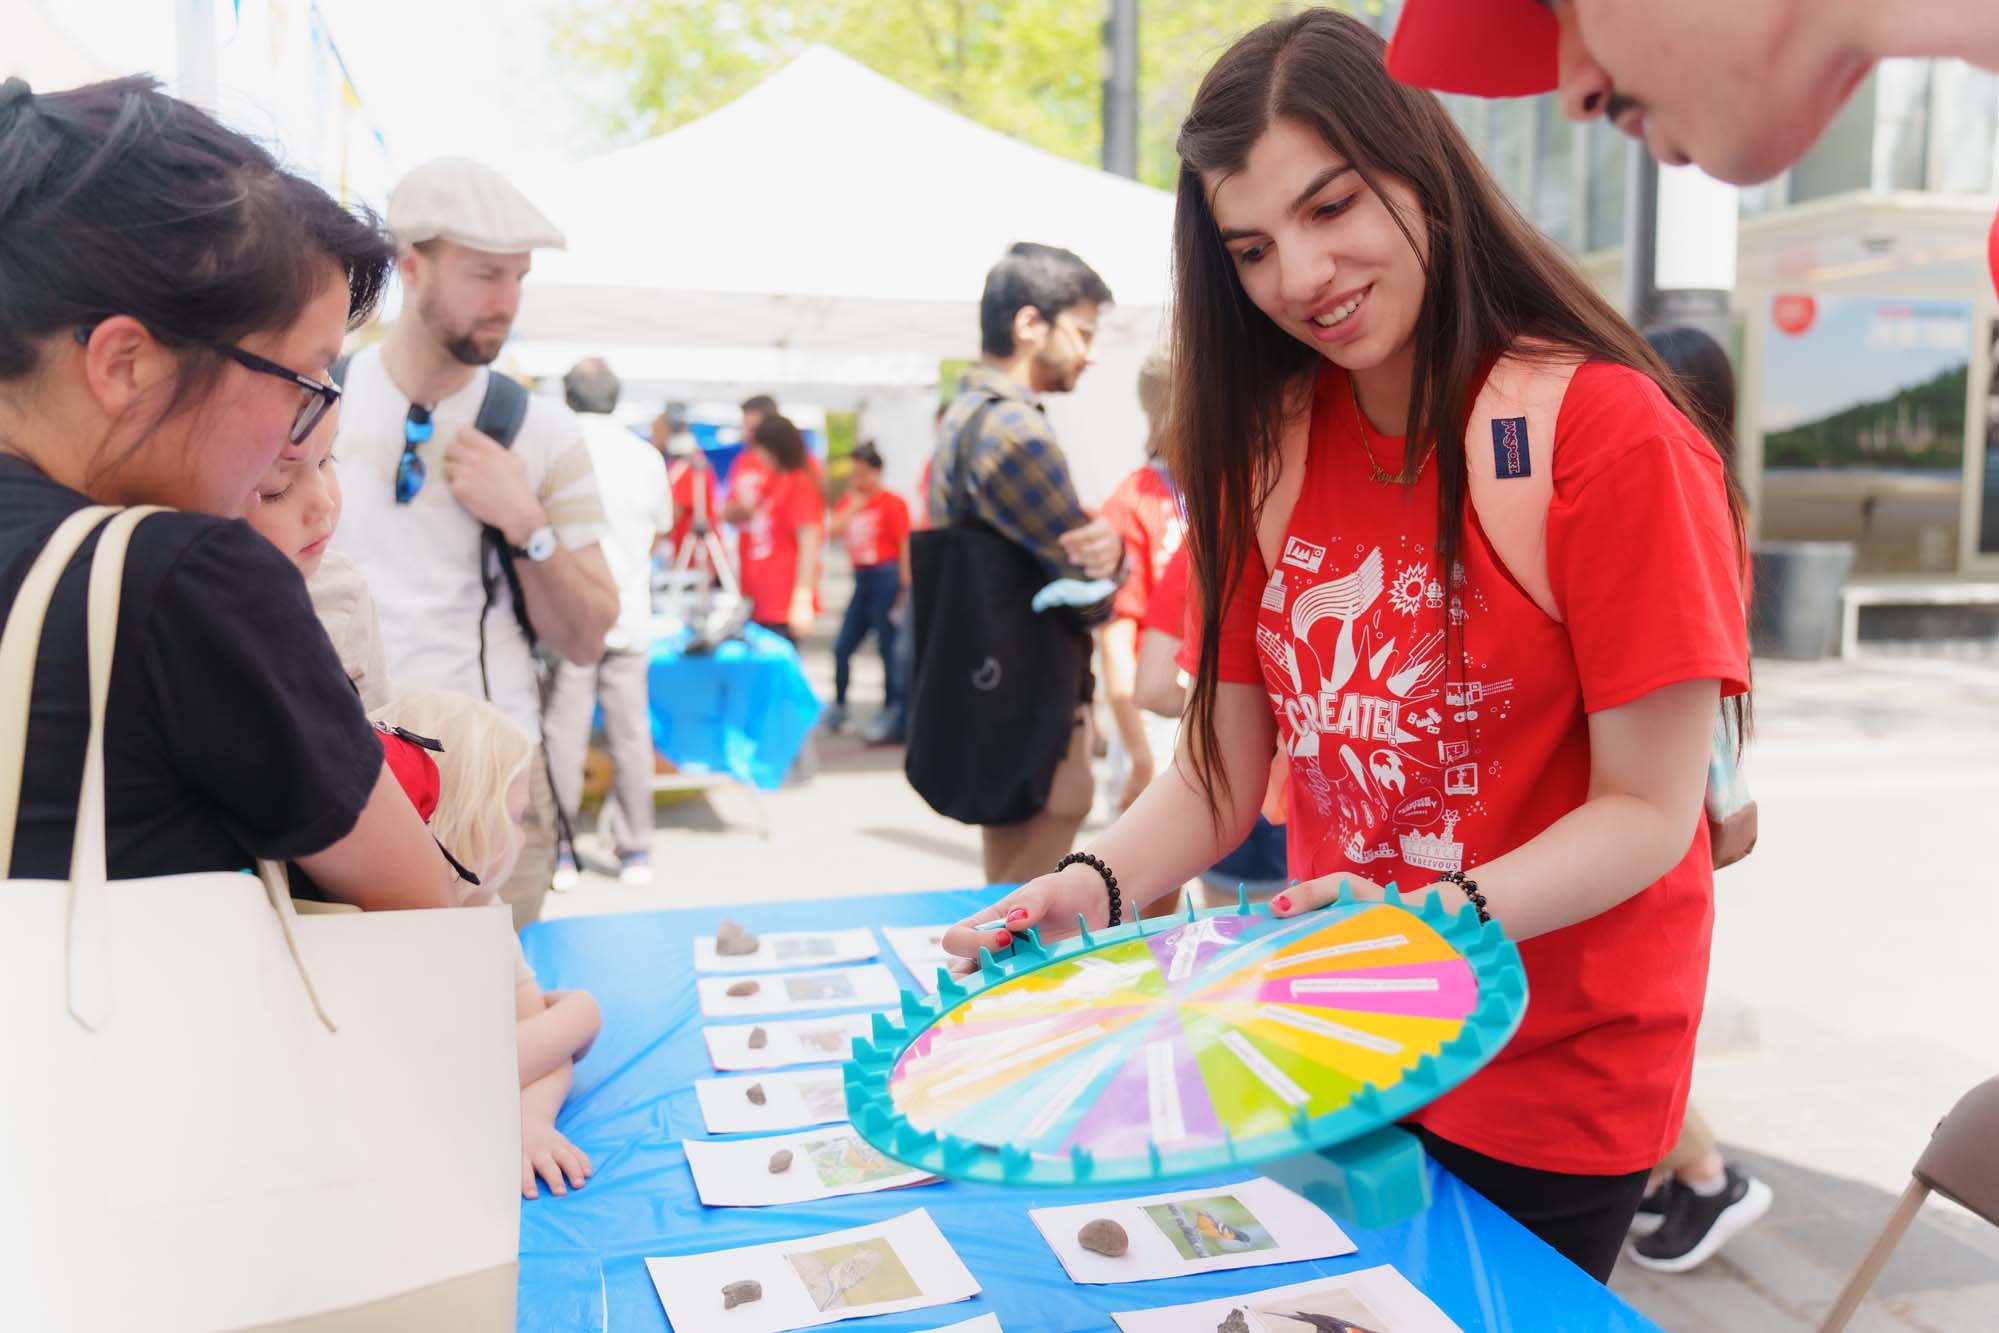 A volunteer holding the spinning wheel for the bird identification activity at the Let's Talk Science booth.